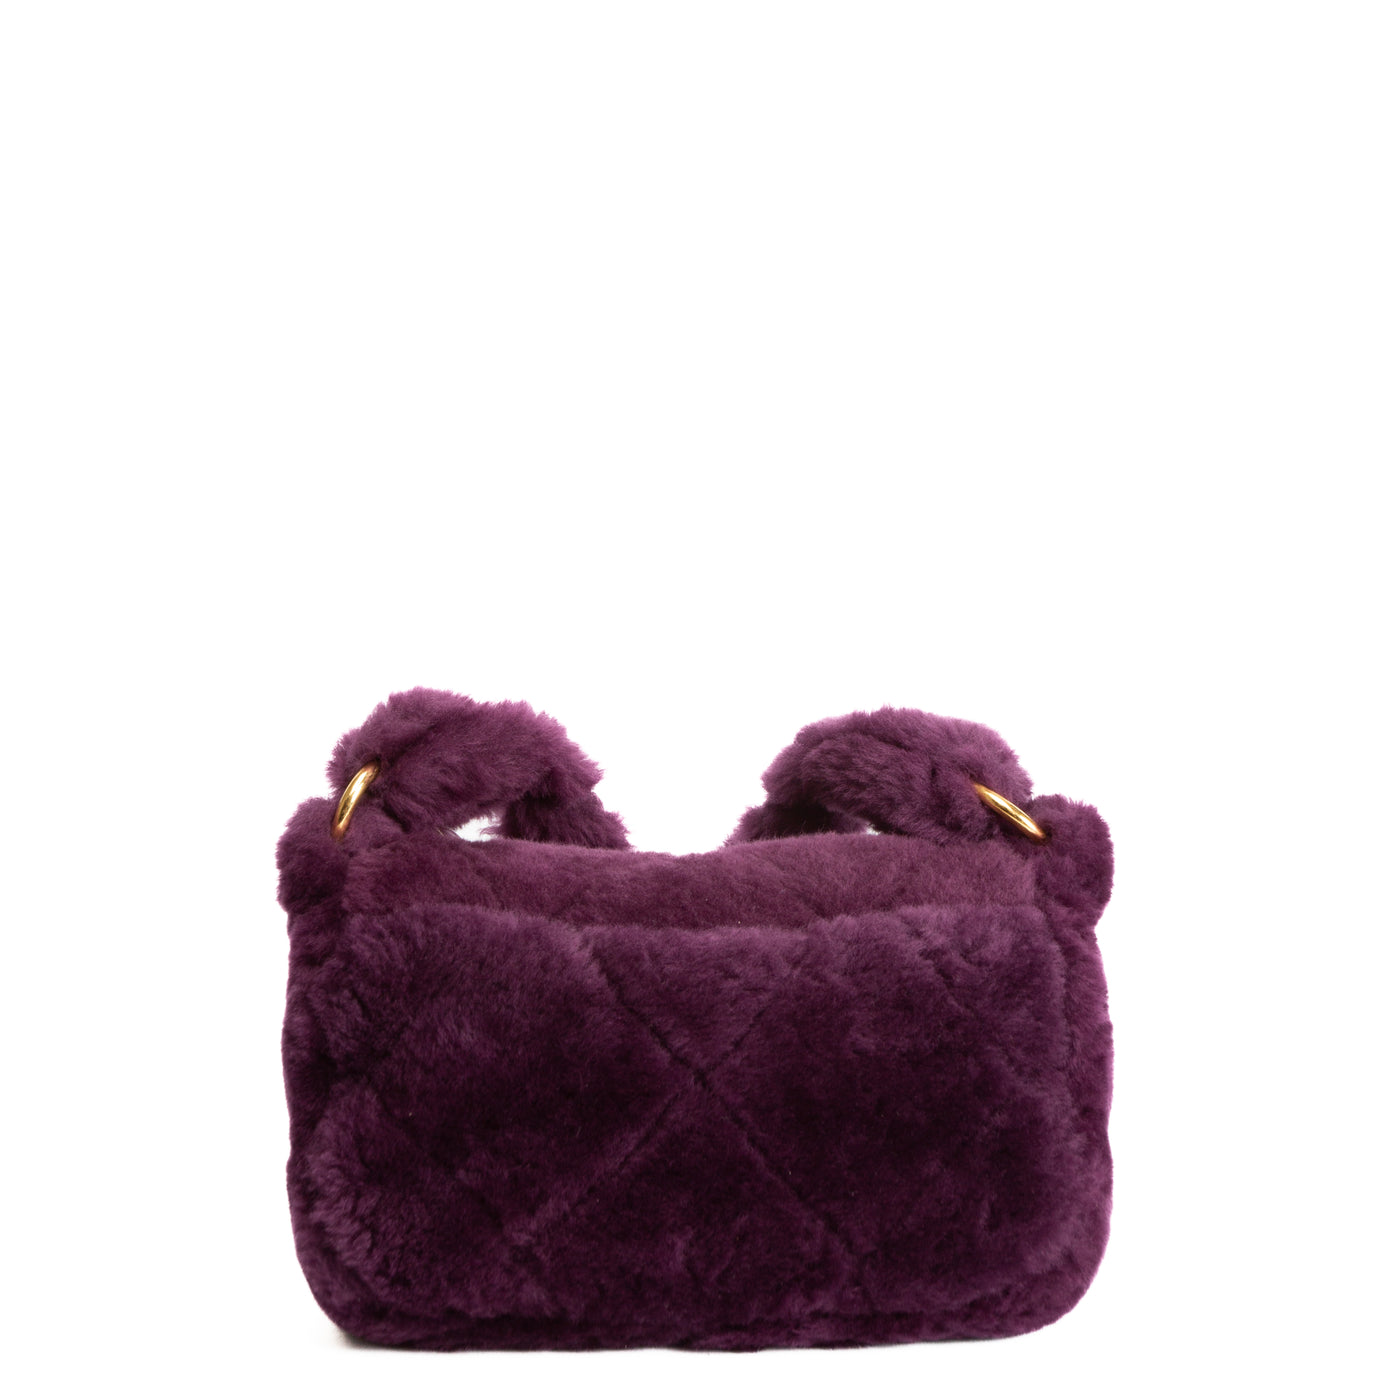 CHANEL Quilted Shearling Coconing Flap Bag - Plum Purple